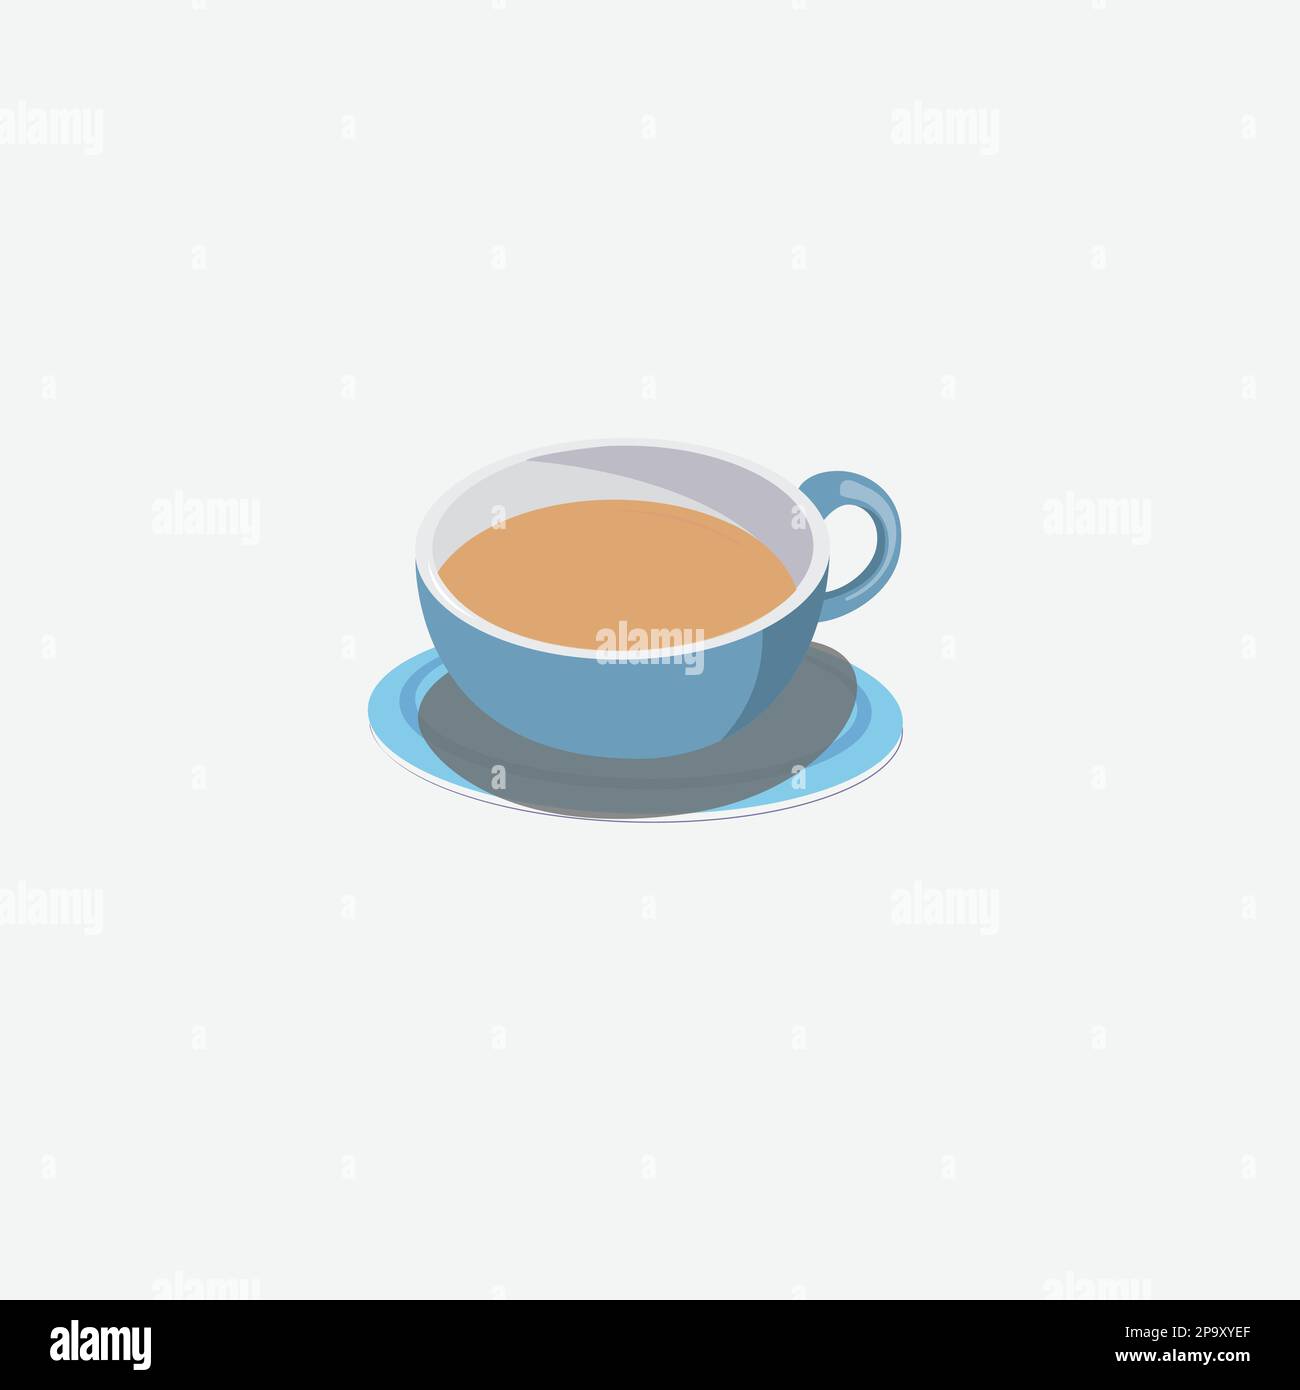 White realistic coffee cup with smoke isolated on transparent